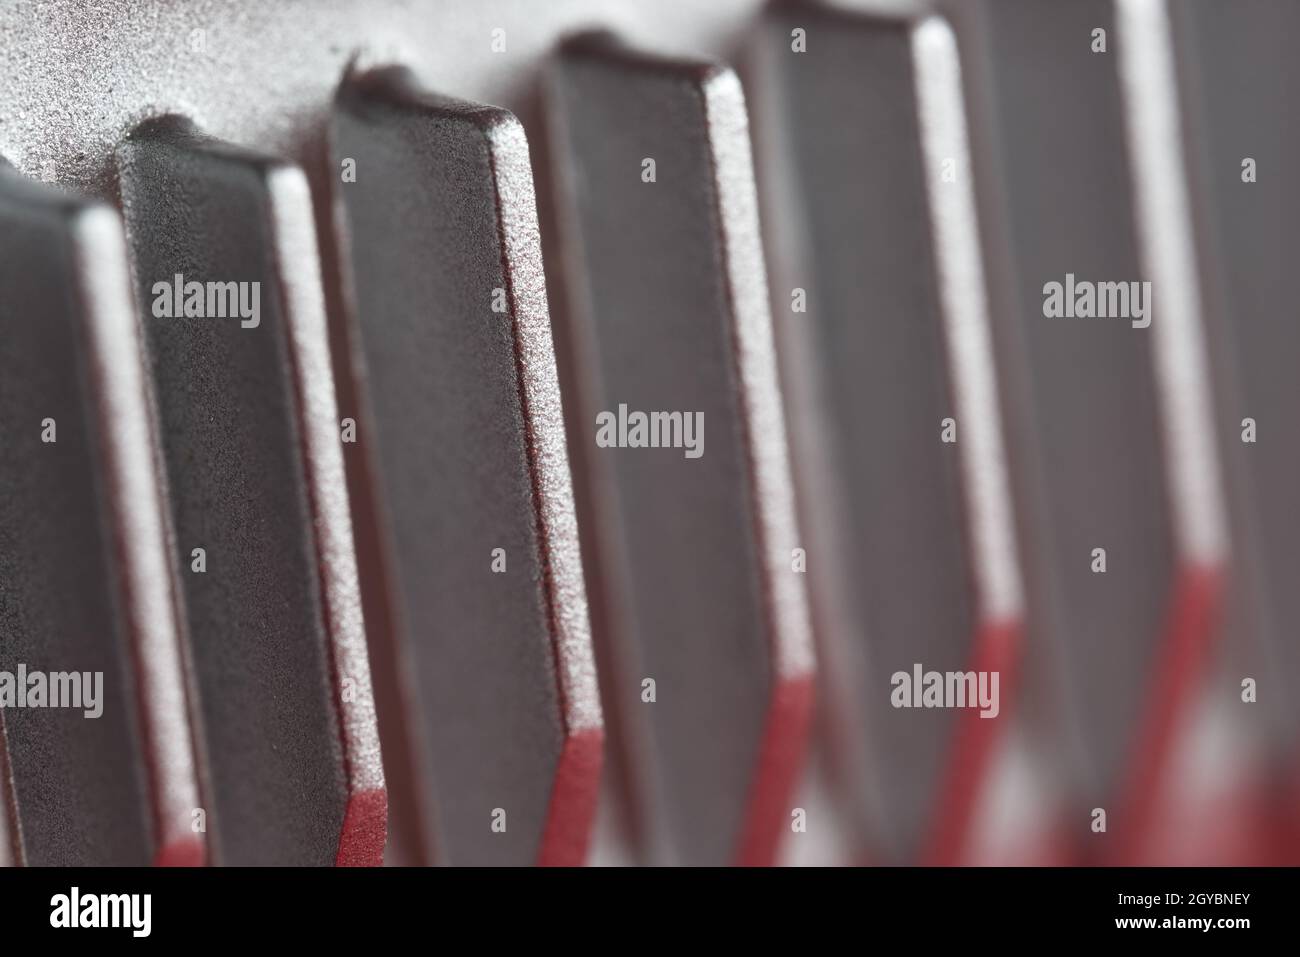 Aluminium or Aluminum heat sink cooling fins. Full frame super macro close up, showing metal detail and coarse finish. Red and silver color theme. Stock Photo